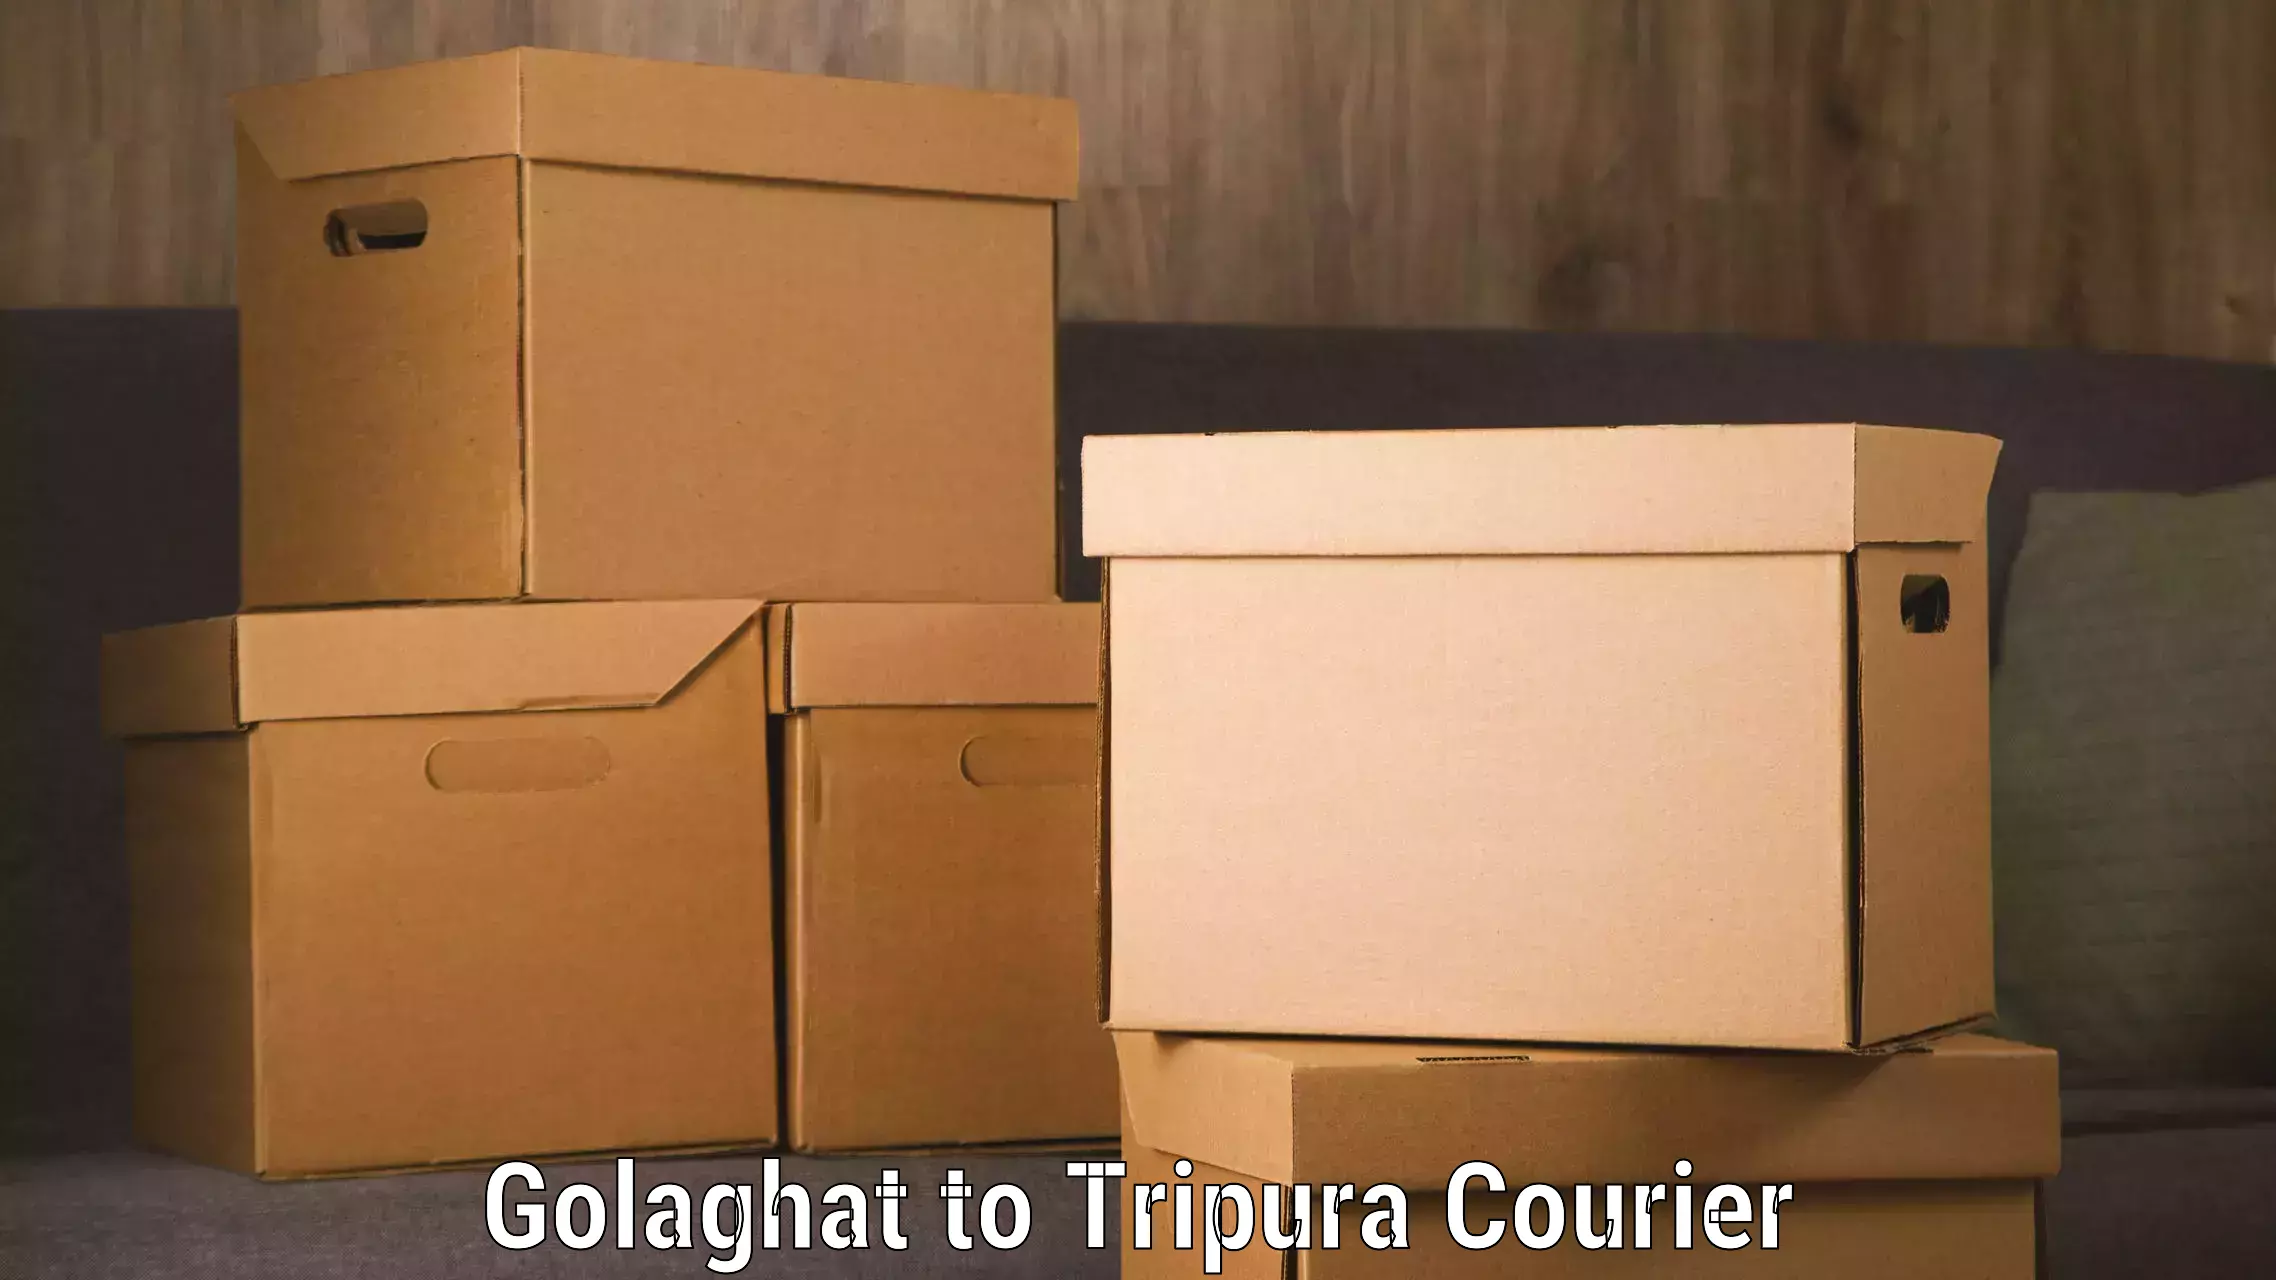 Automated luggage transport Golaghat to Tripura